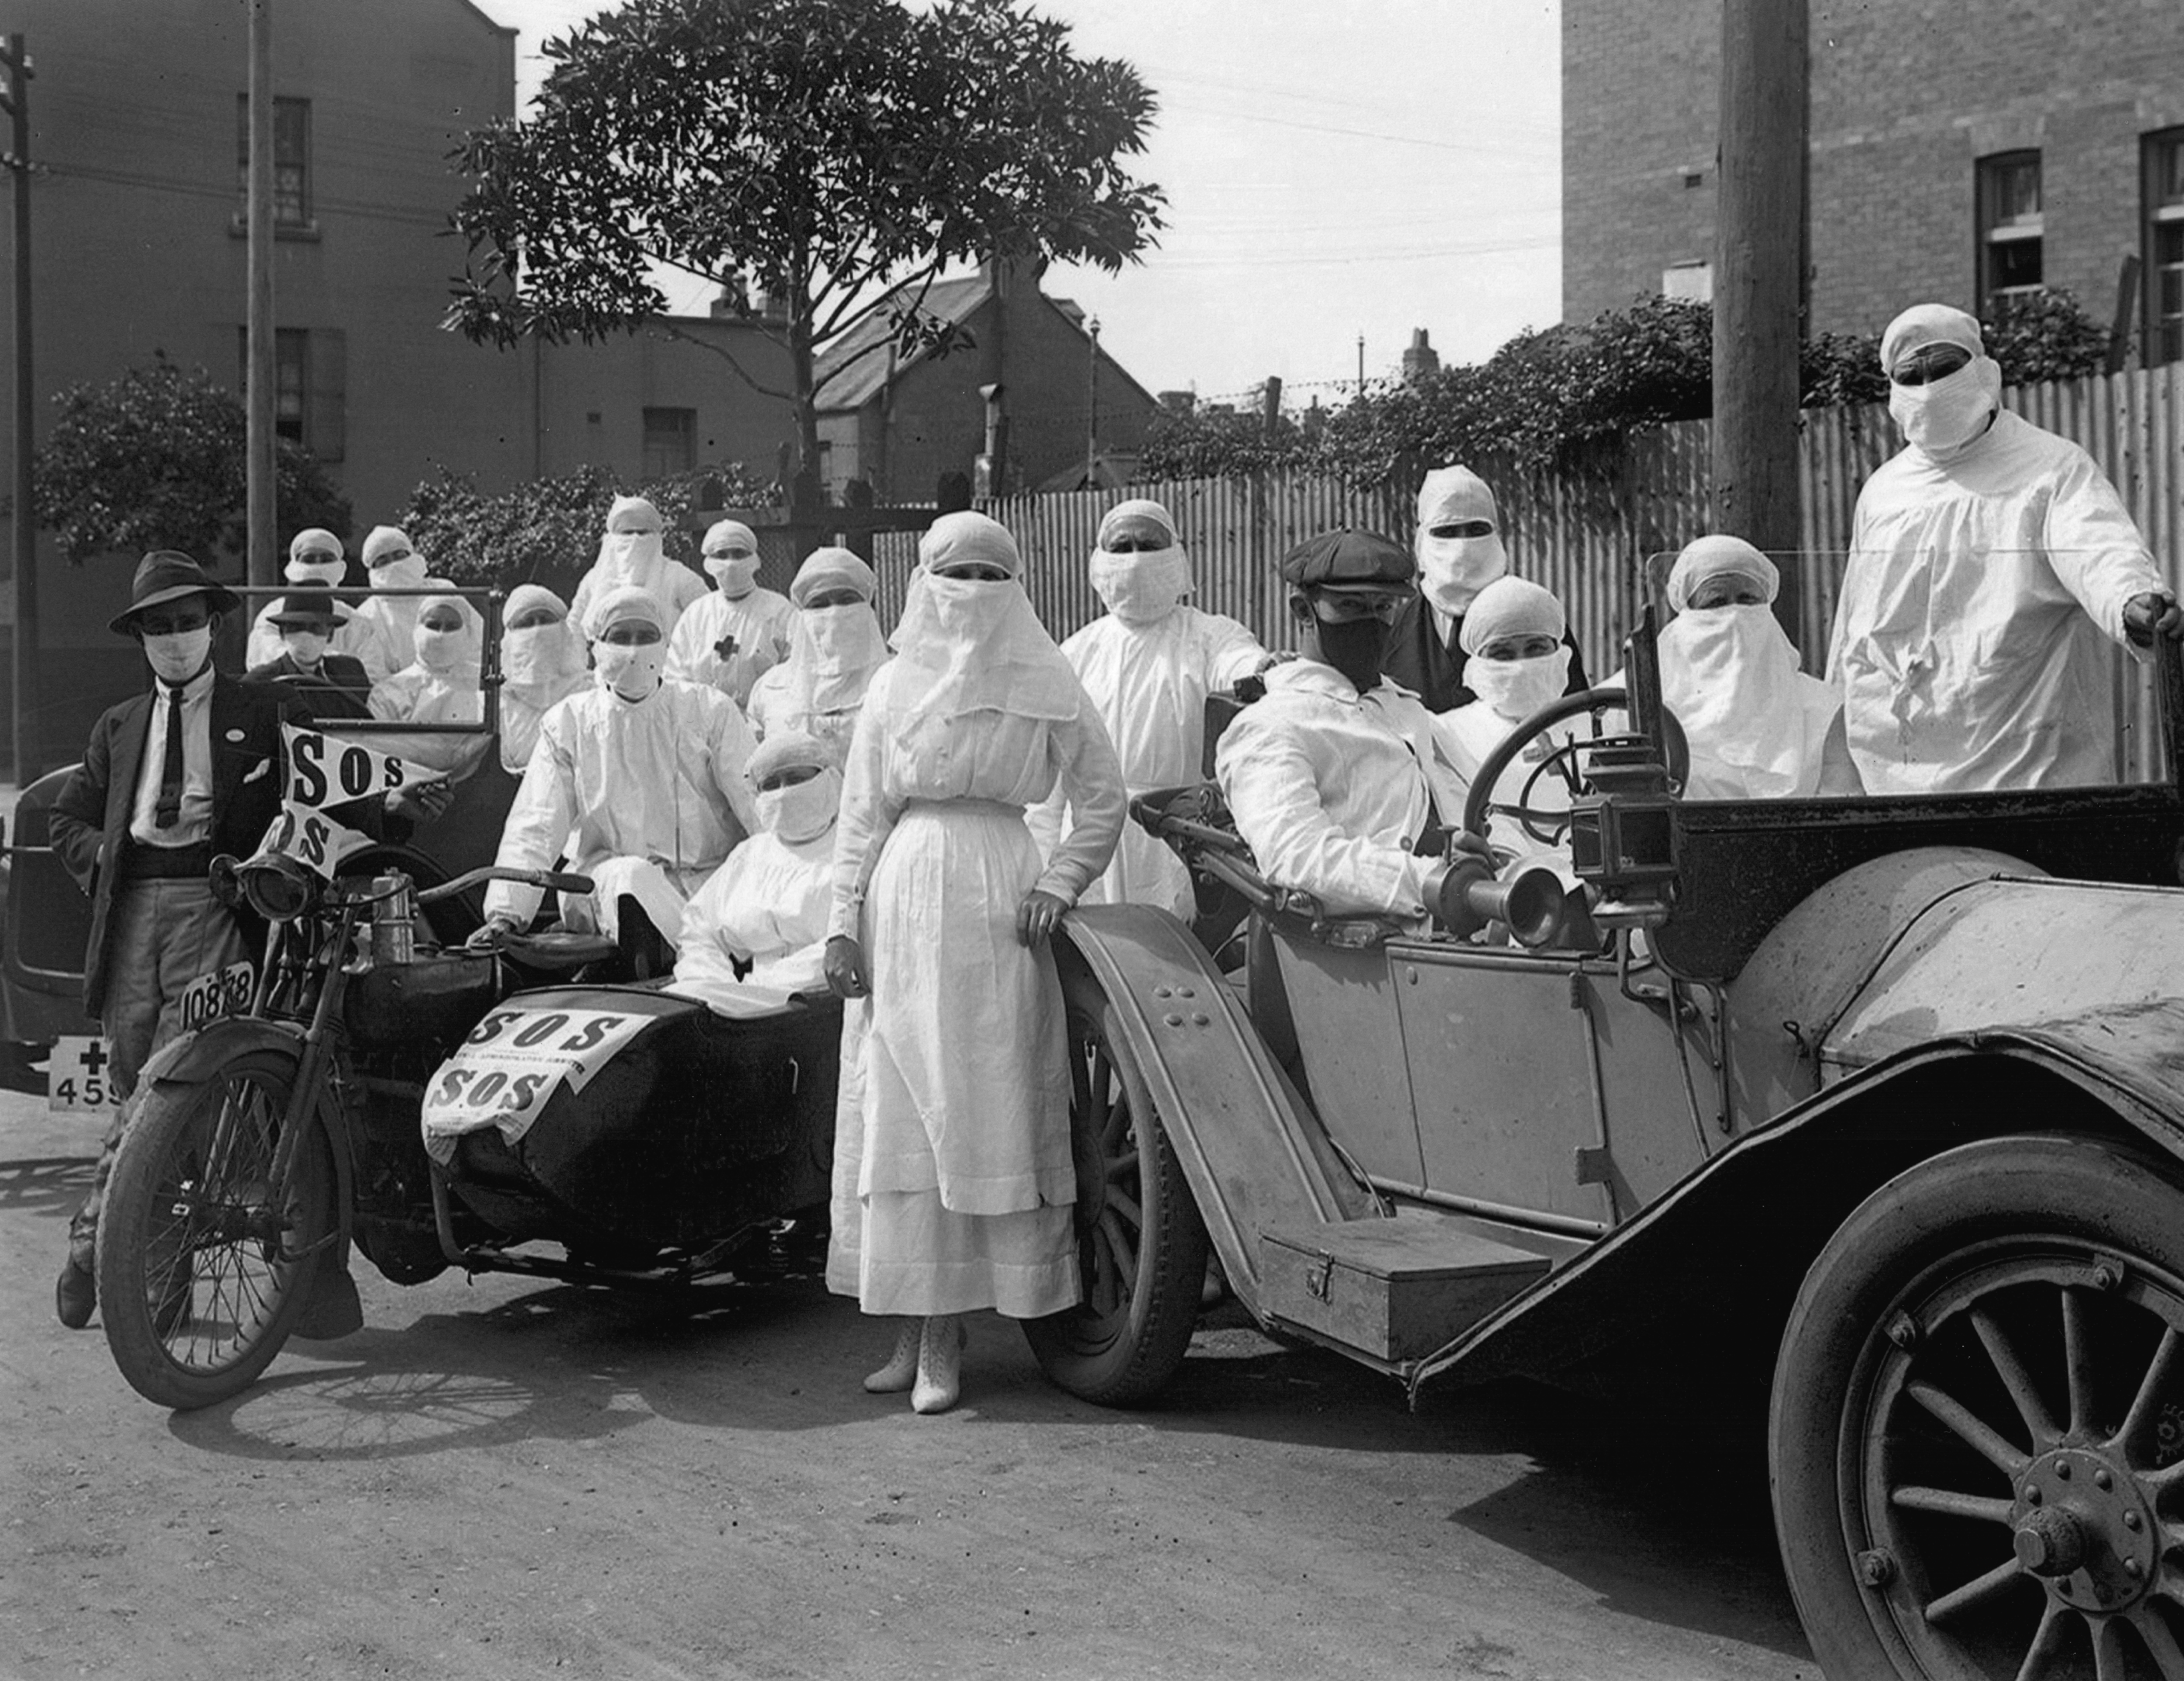 Black and white photograph showing a group of standing healthcare workers dressed in floor-length white gowns wearing masks and cloth-caps, three sit in a car and one in a sidecar